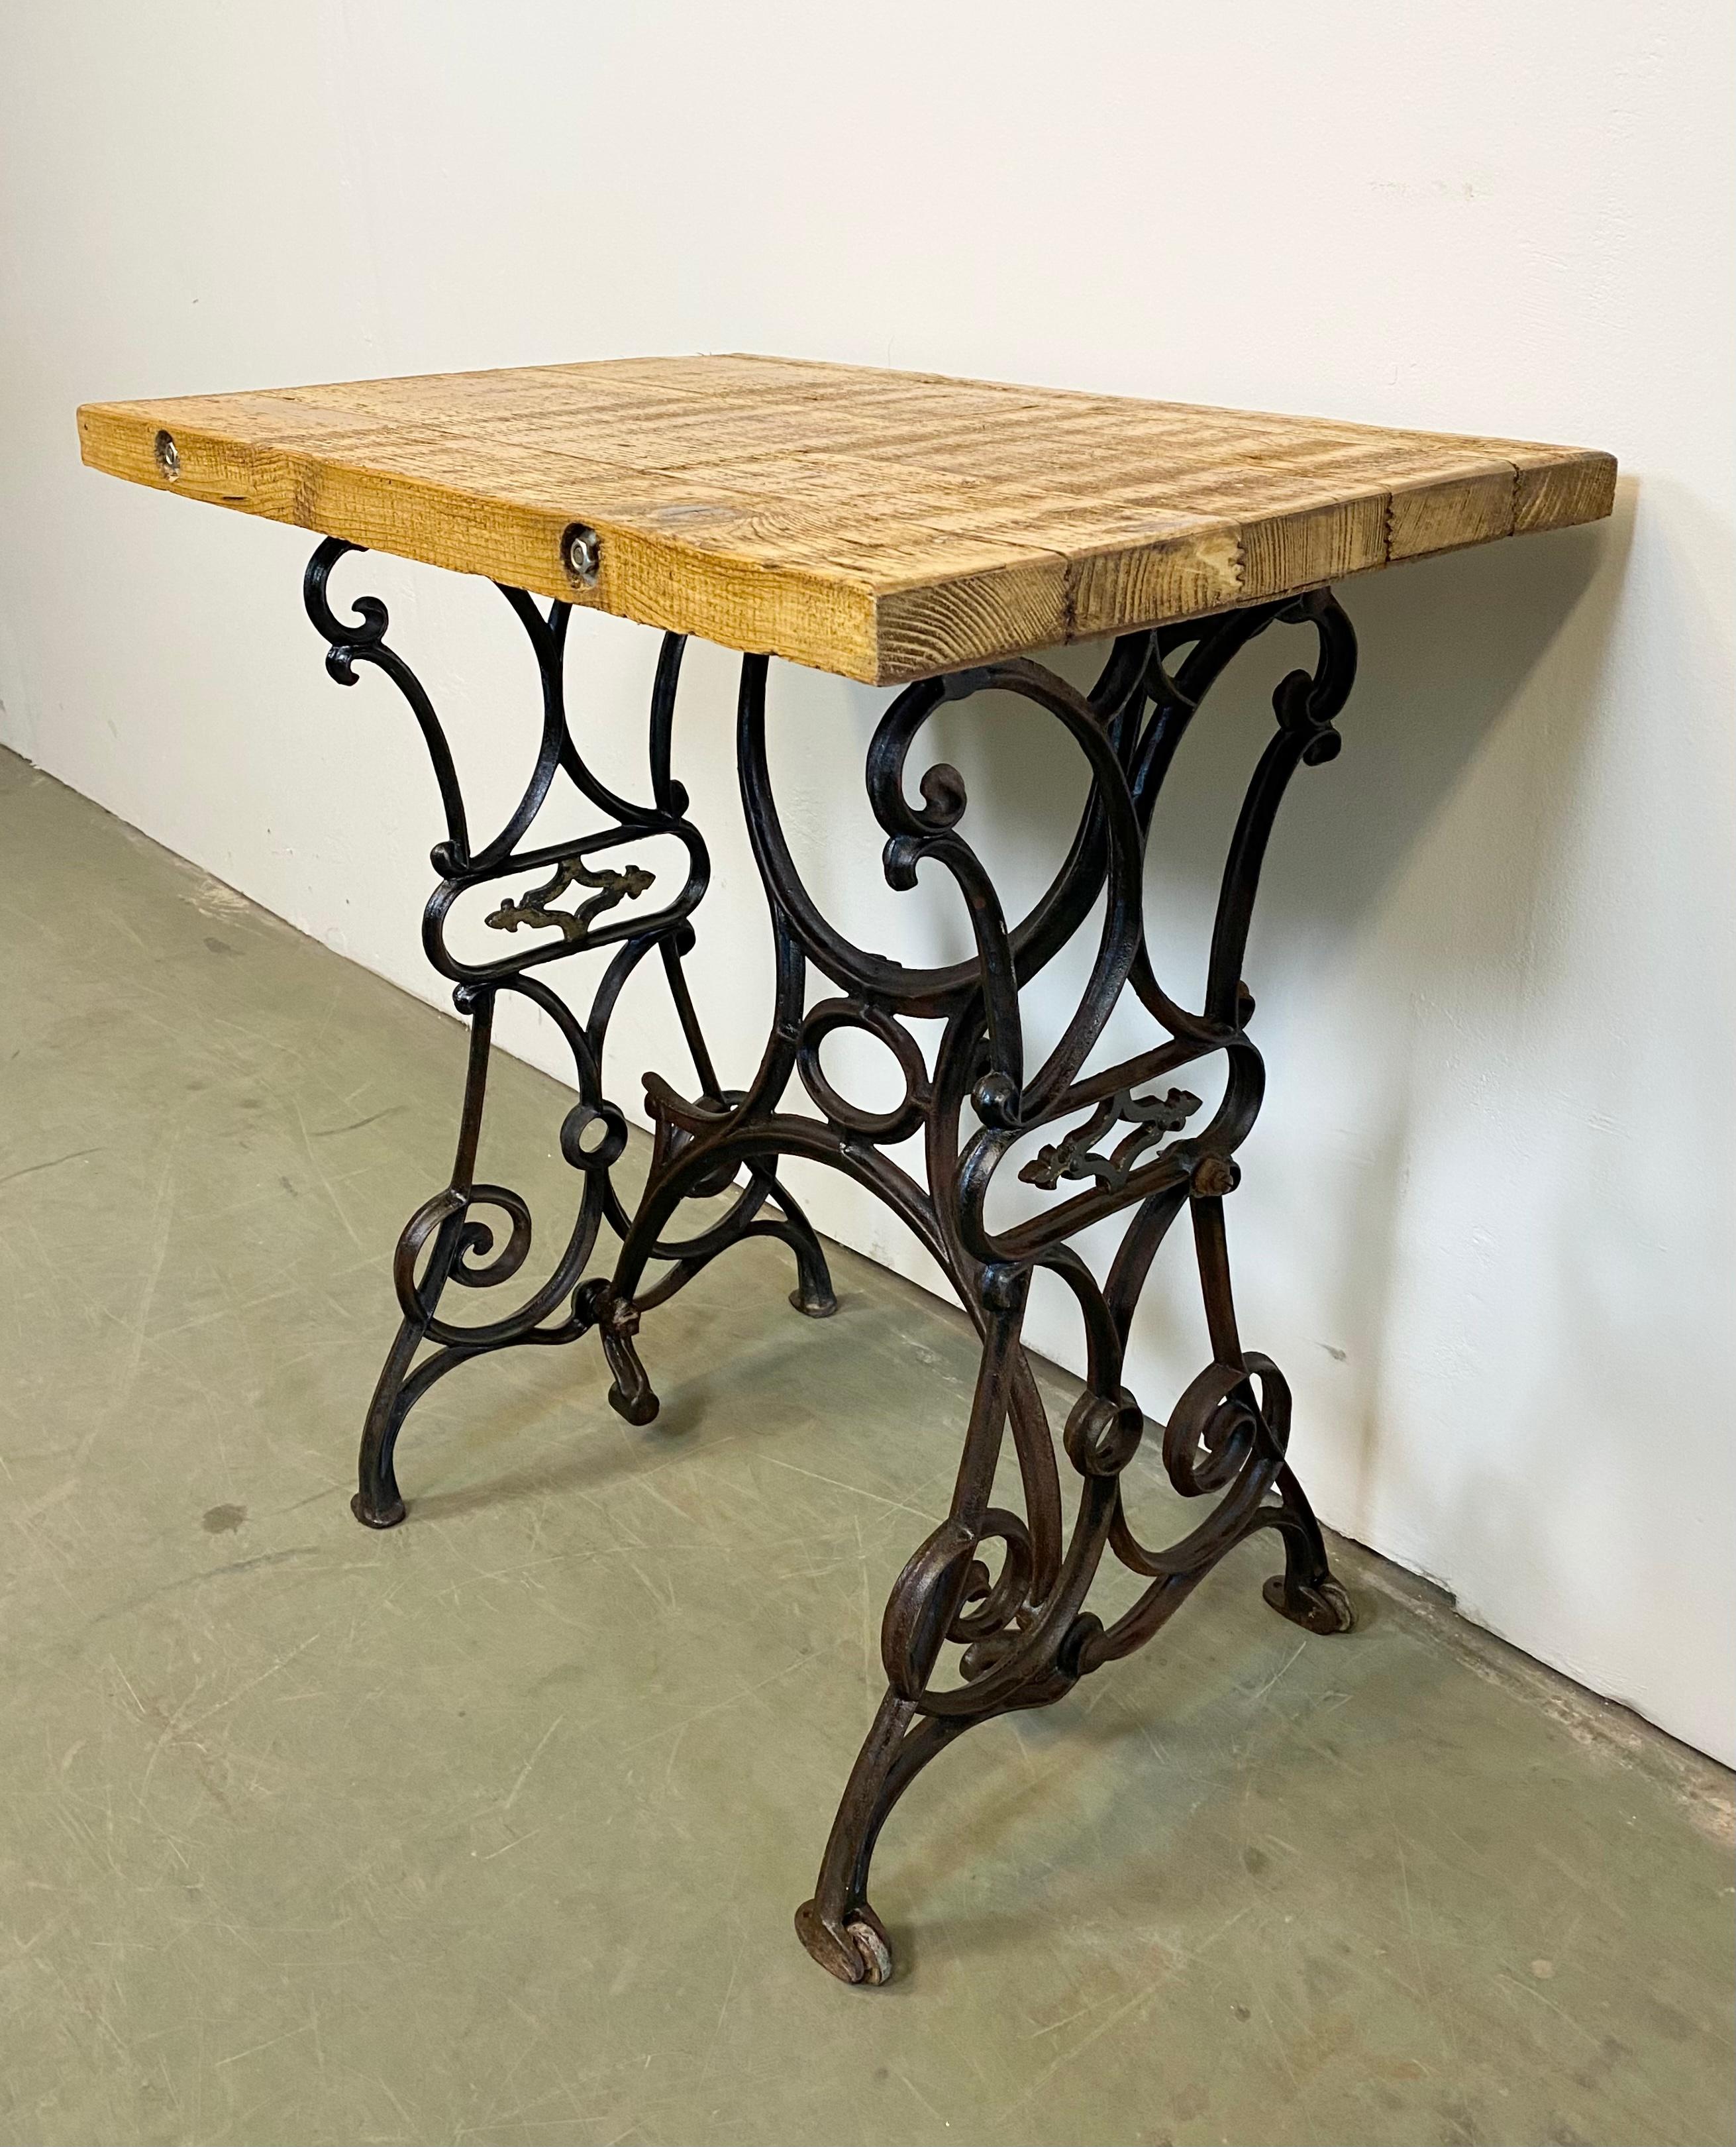 This industrial table comes from the 1950s. The old wooden top was recently mounted on a former sewing machine cast iron base. The weight of the table is 23 kg.